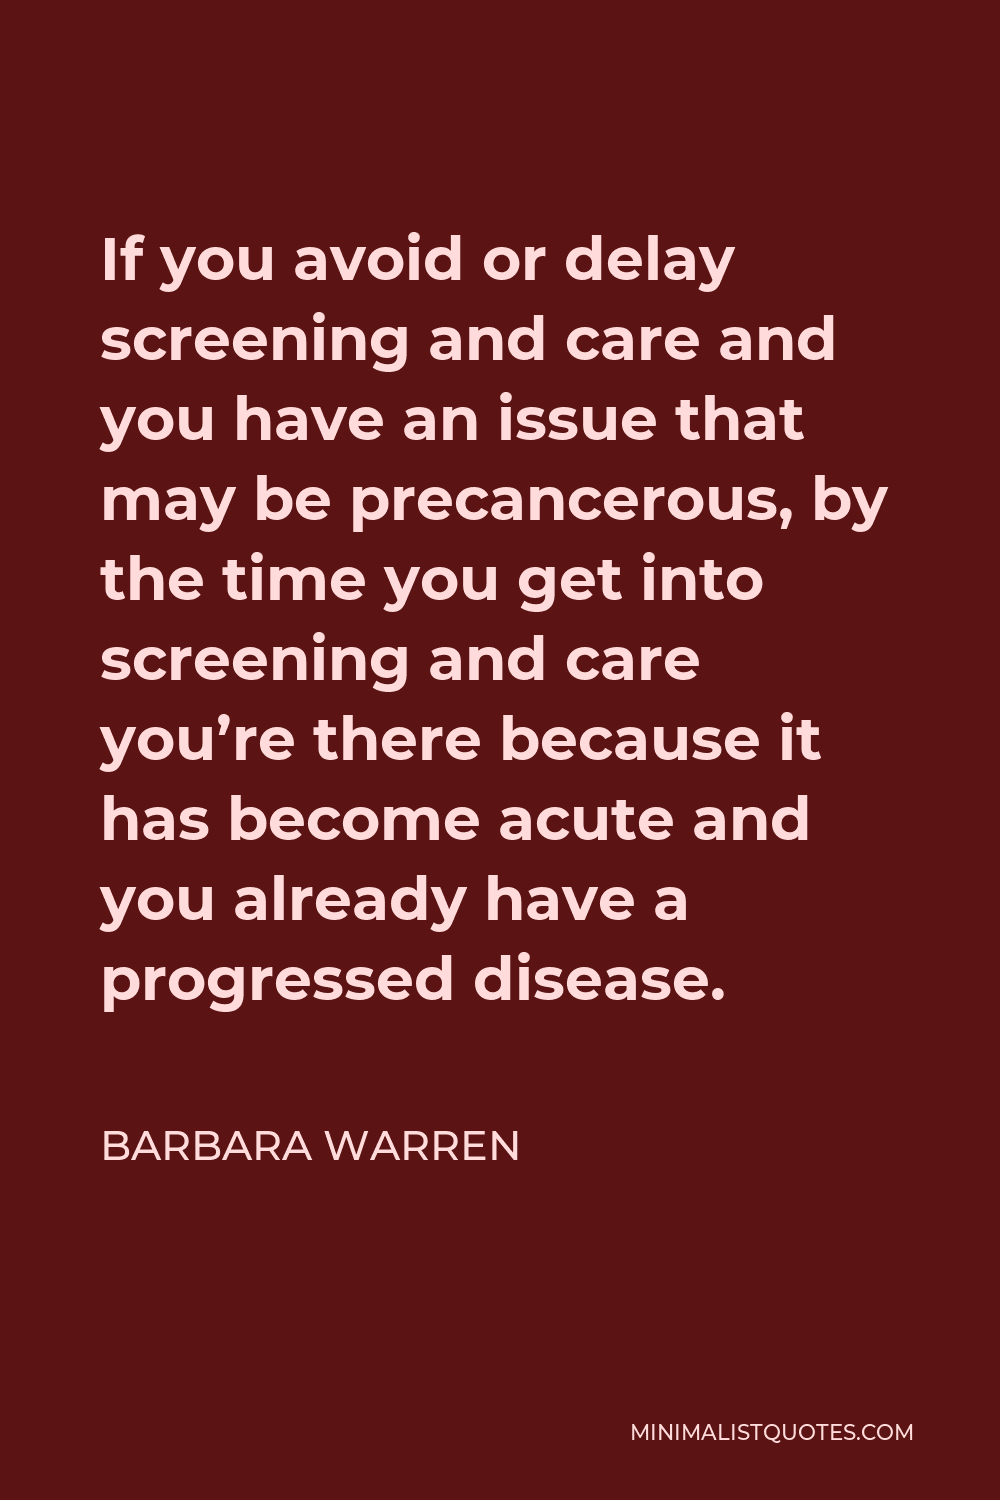 Barbara Warren Quote - If you avoid or delay screening and care and you have an issue that may be precancerous, by the time you get into screening and care you’re there because it has become acute and you already have a progressed disease.